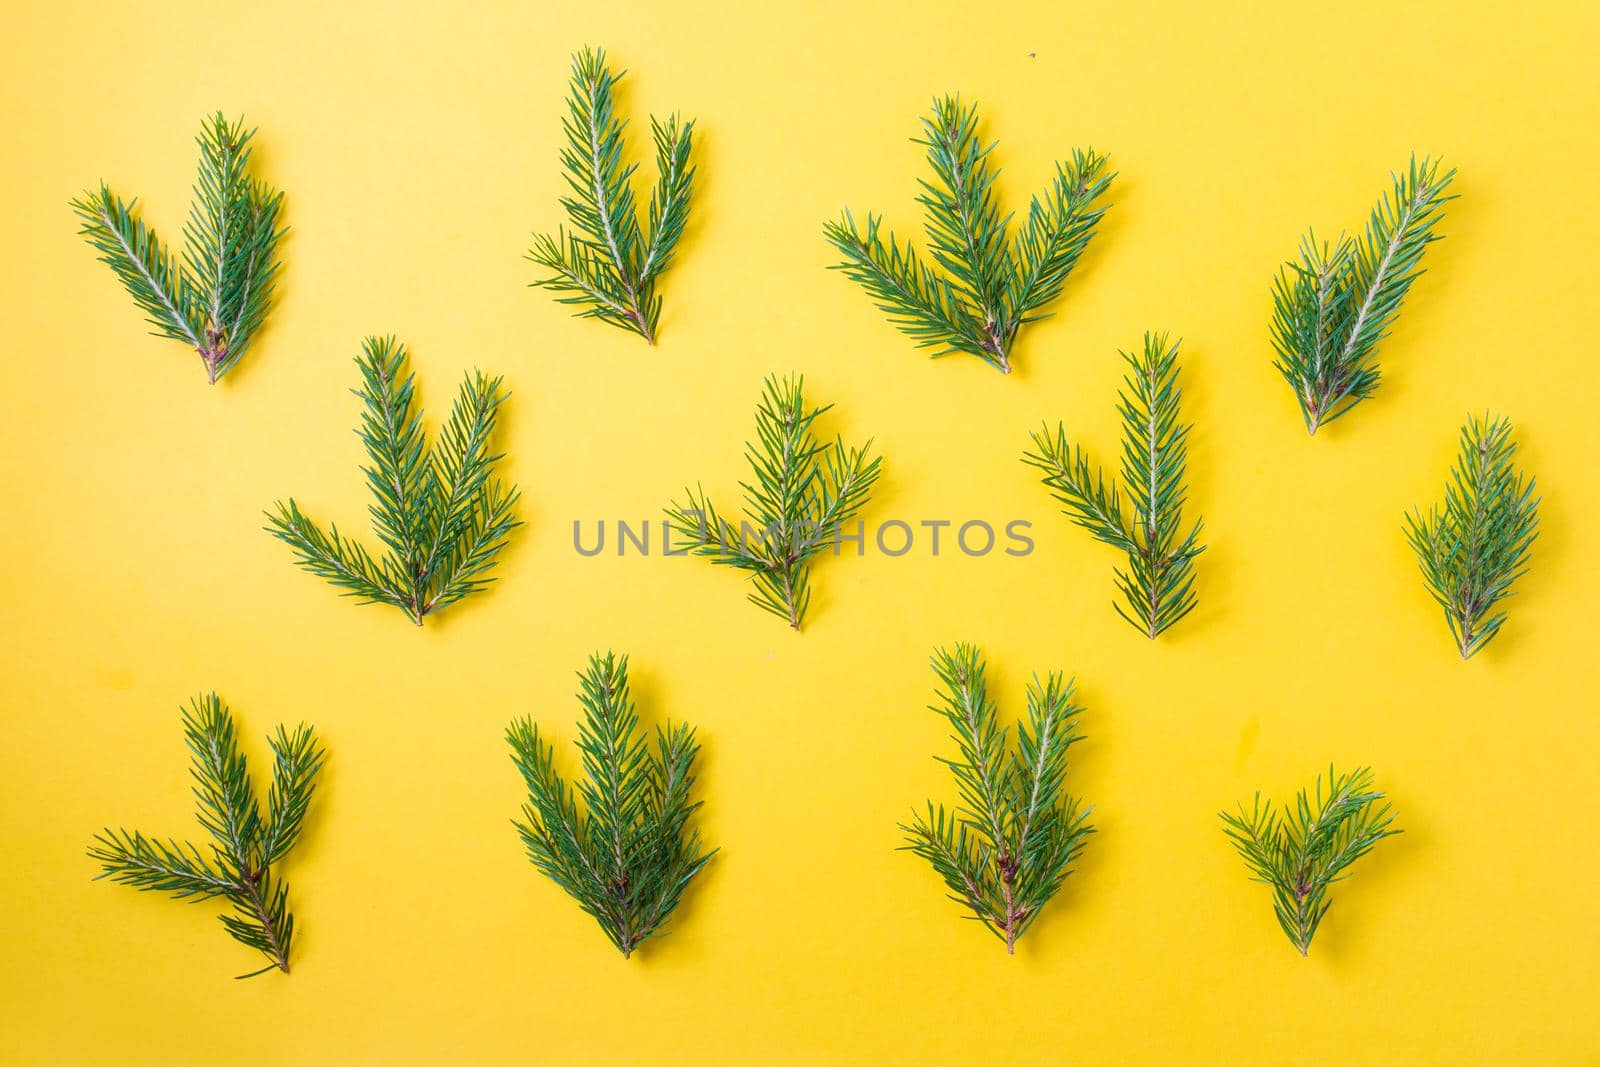 pattern of small spruce branches on a yellow background